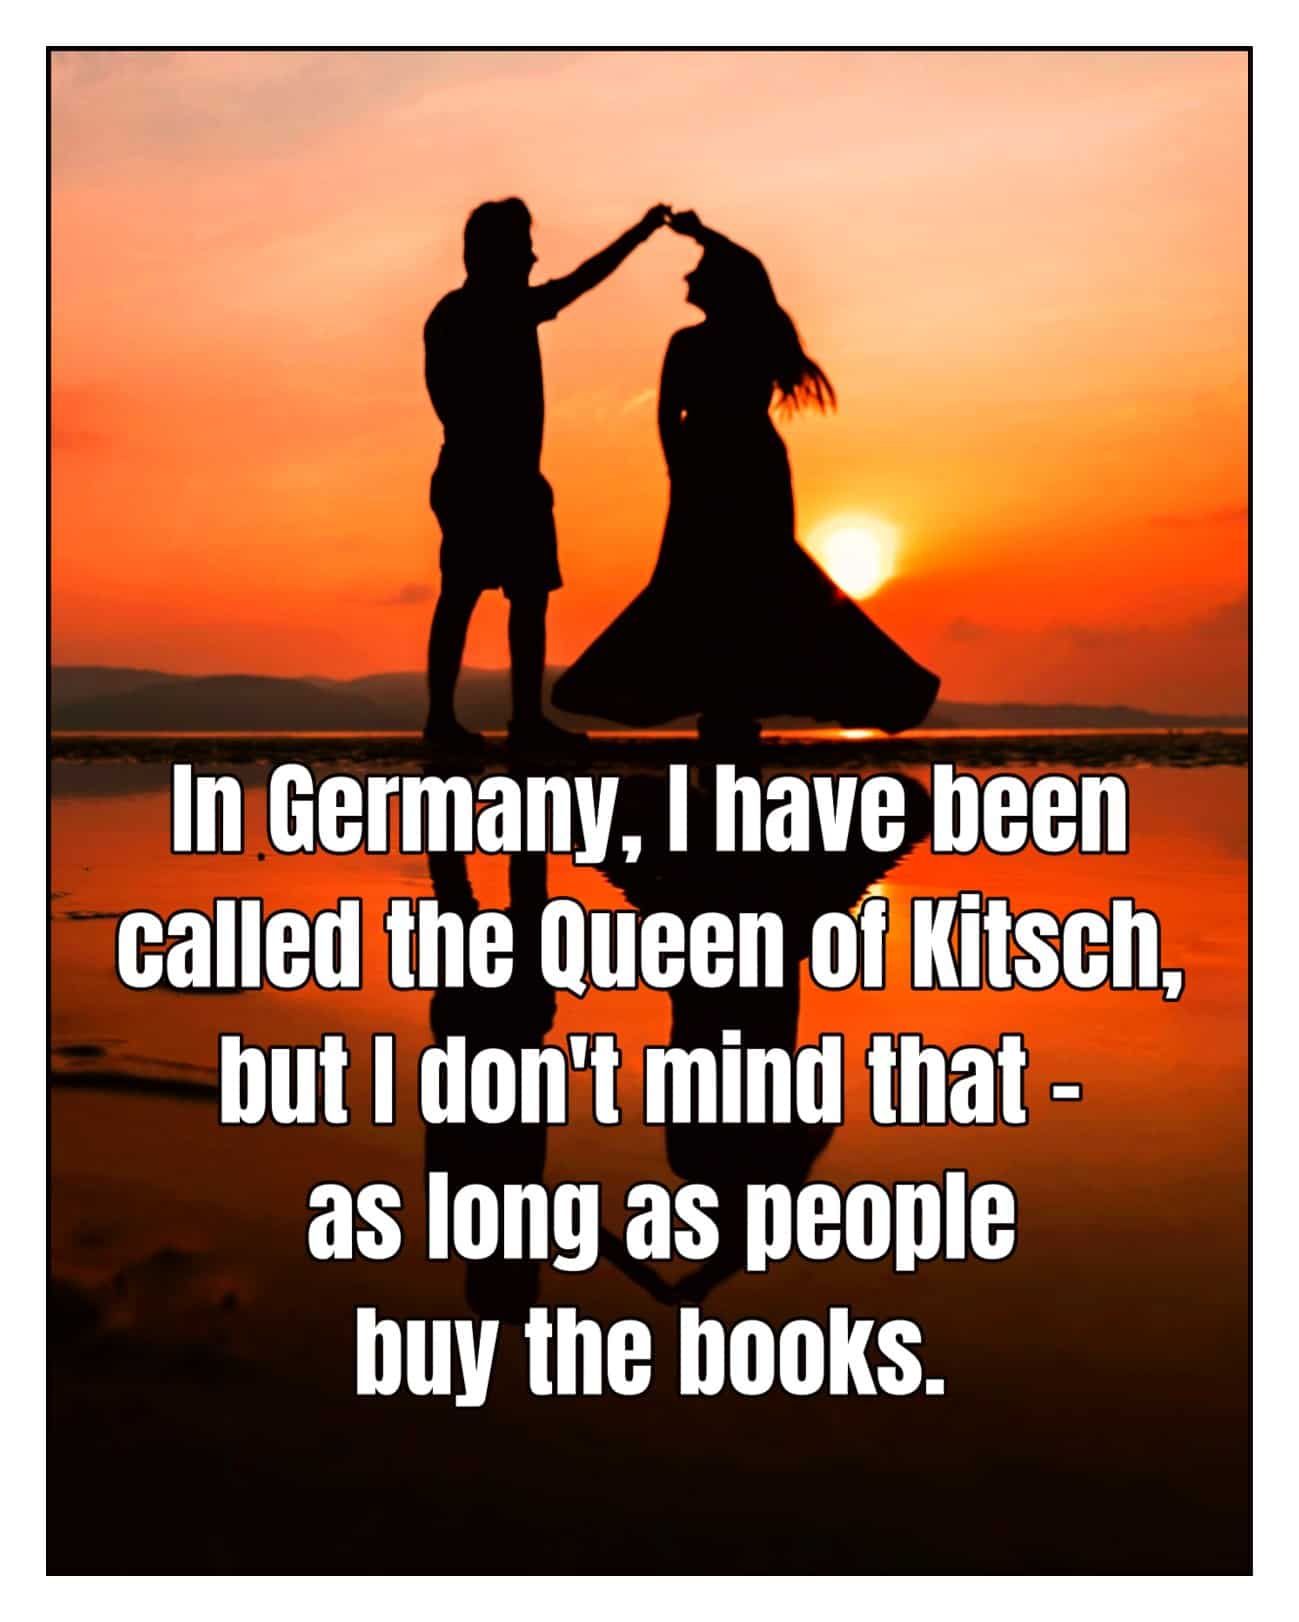 In Germany, I have been called the Queen of Kitsch, but I don't mind that - as long as people buy the books.